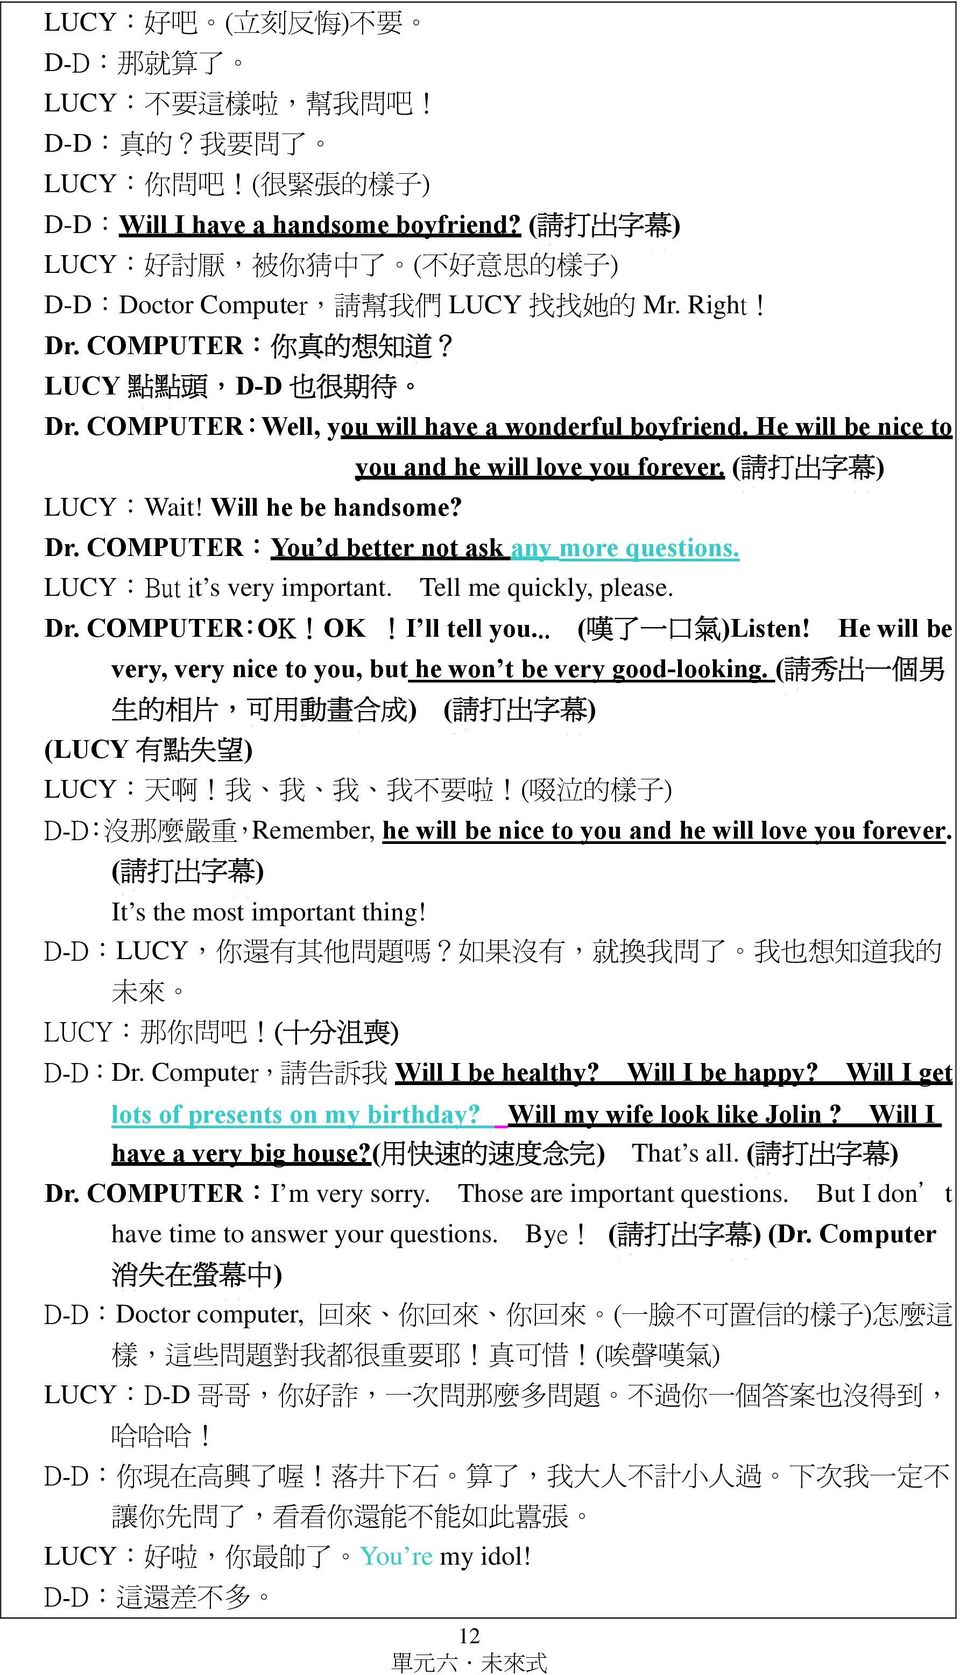 COMPUTER:Well, you will have a wonderful boyfriend. He will be nice to you and he will love you forever. ( 請 打 出 字 幕 ) LUCY:Wait! Will he be handsome? Dr.